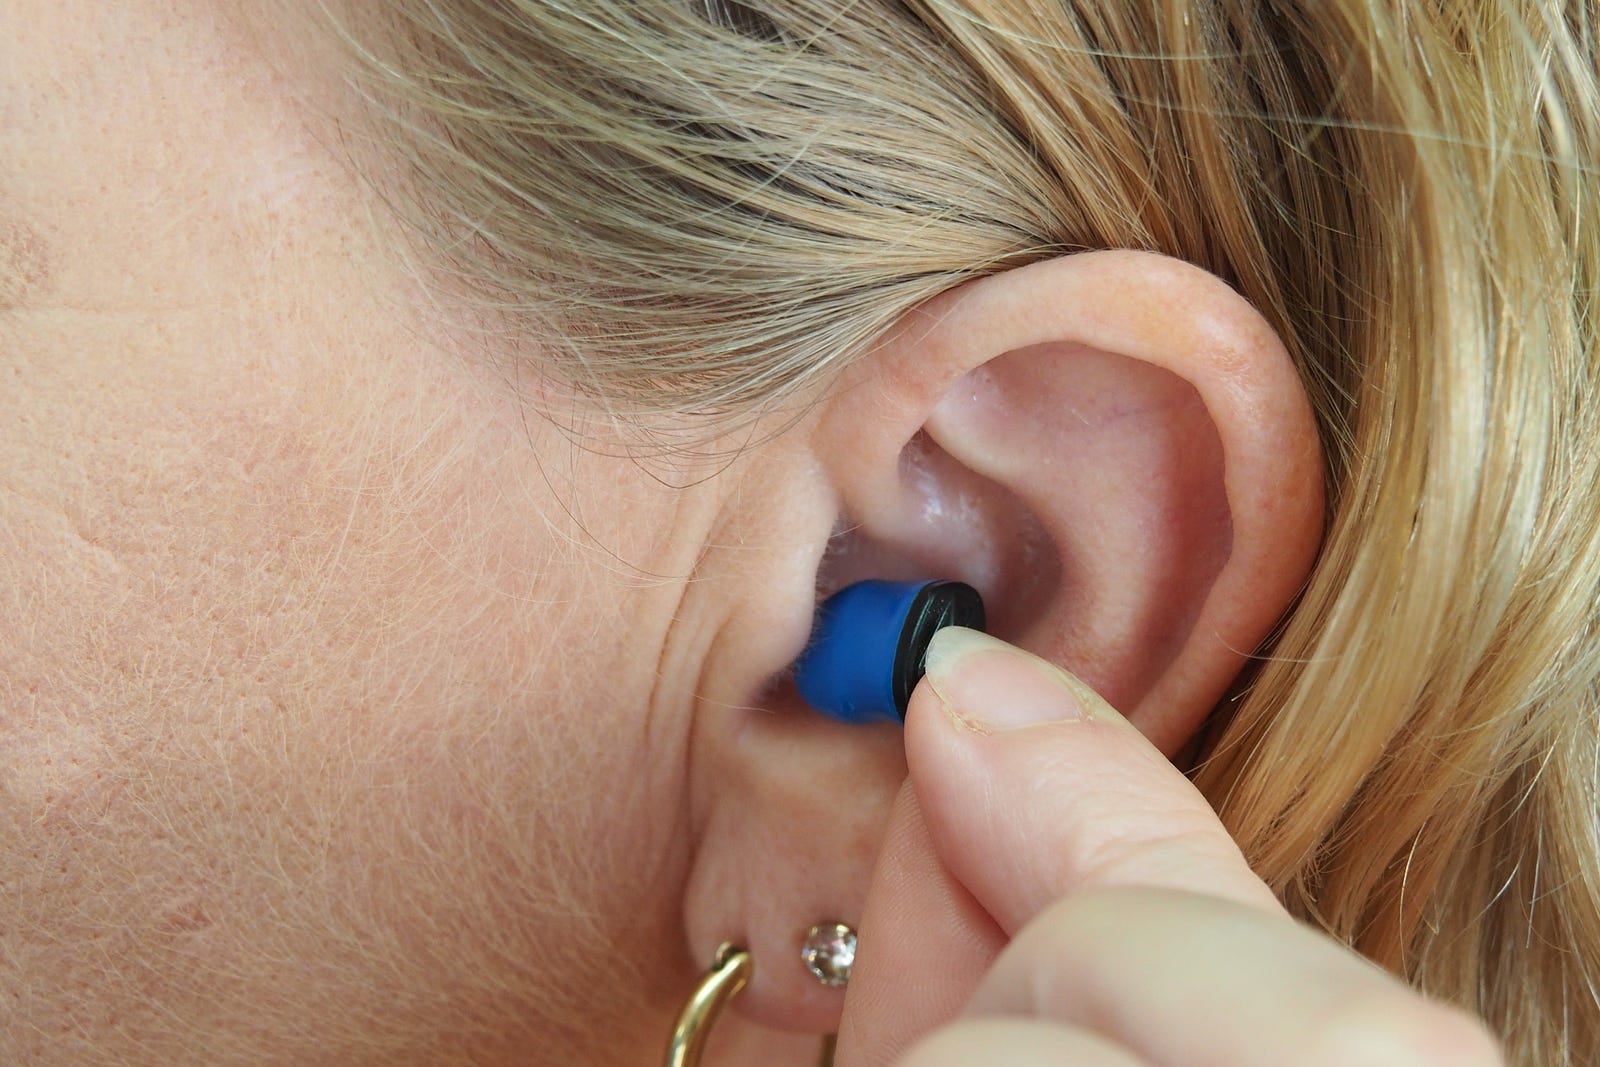 A close-up photo of a woman placing a blue hearing aid into her left ear. Studies suggest that treating hearing loss may help mitigate cognitive decline, reducing the risk of conditions like dementia and Alzheimer’s disease.